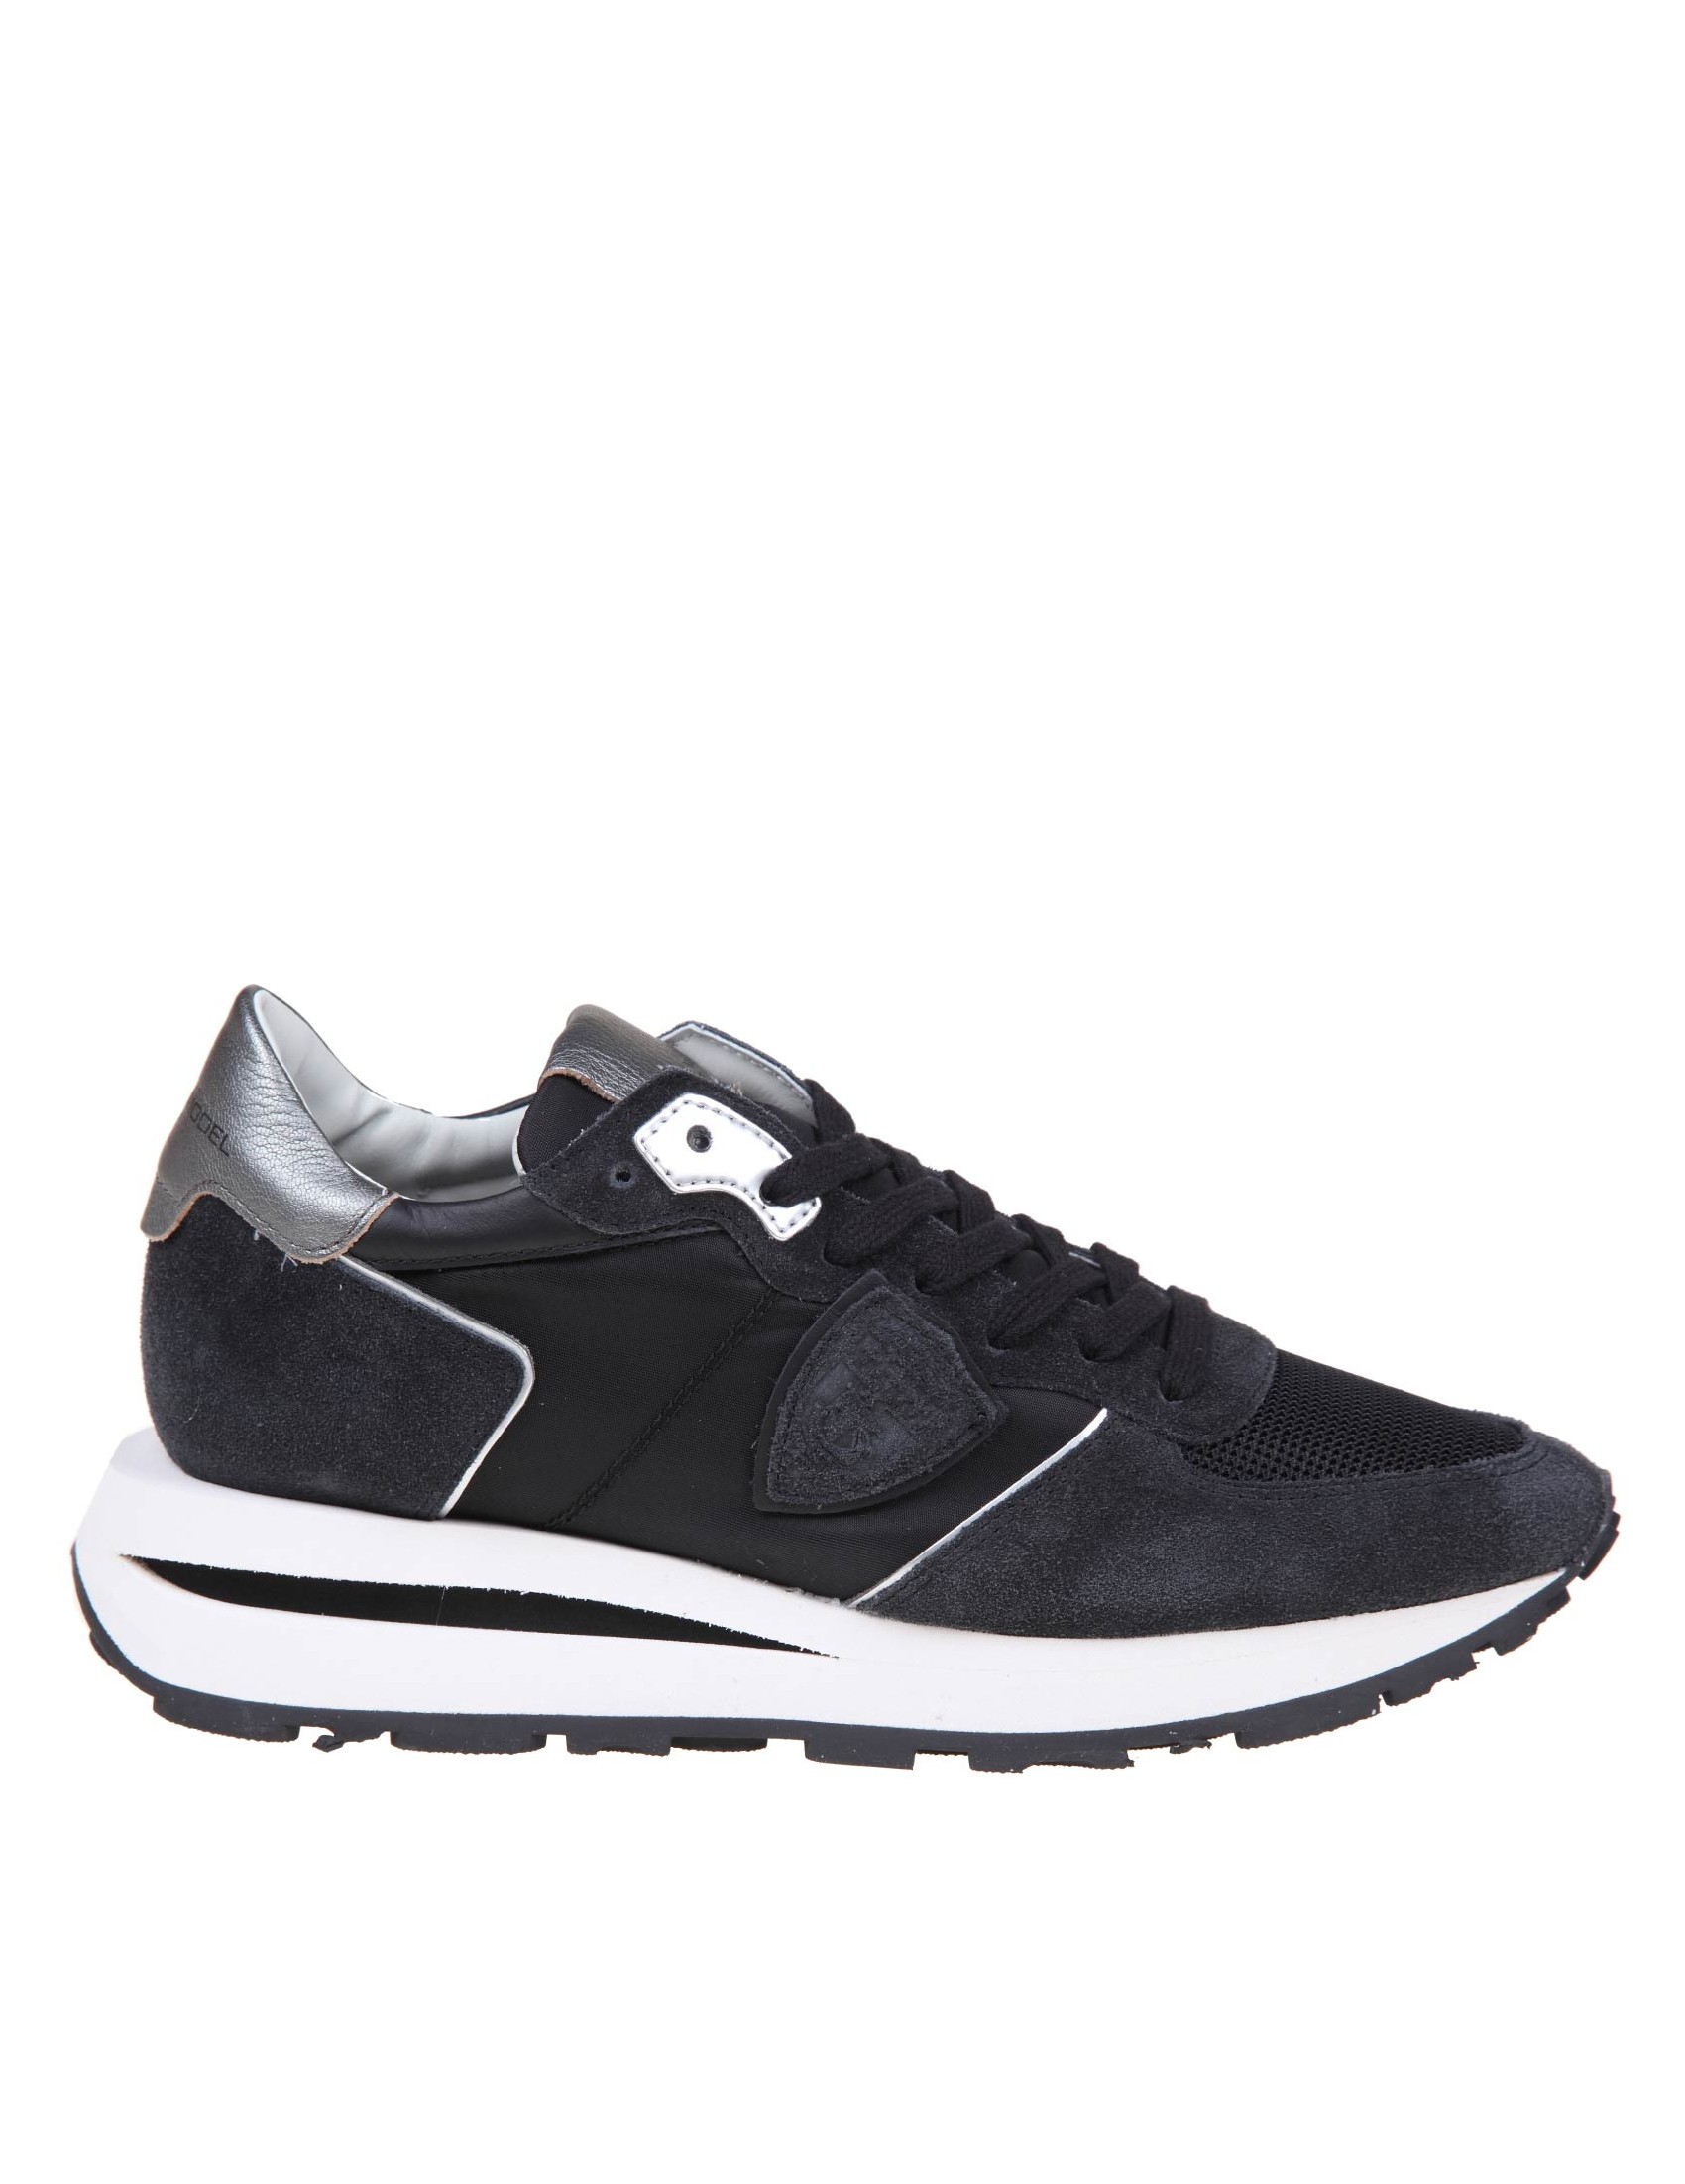 PHILIPPE MODEL TRES TEMPLE SNEAKERS IN BLACK SUEDE